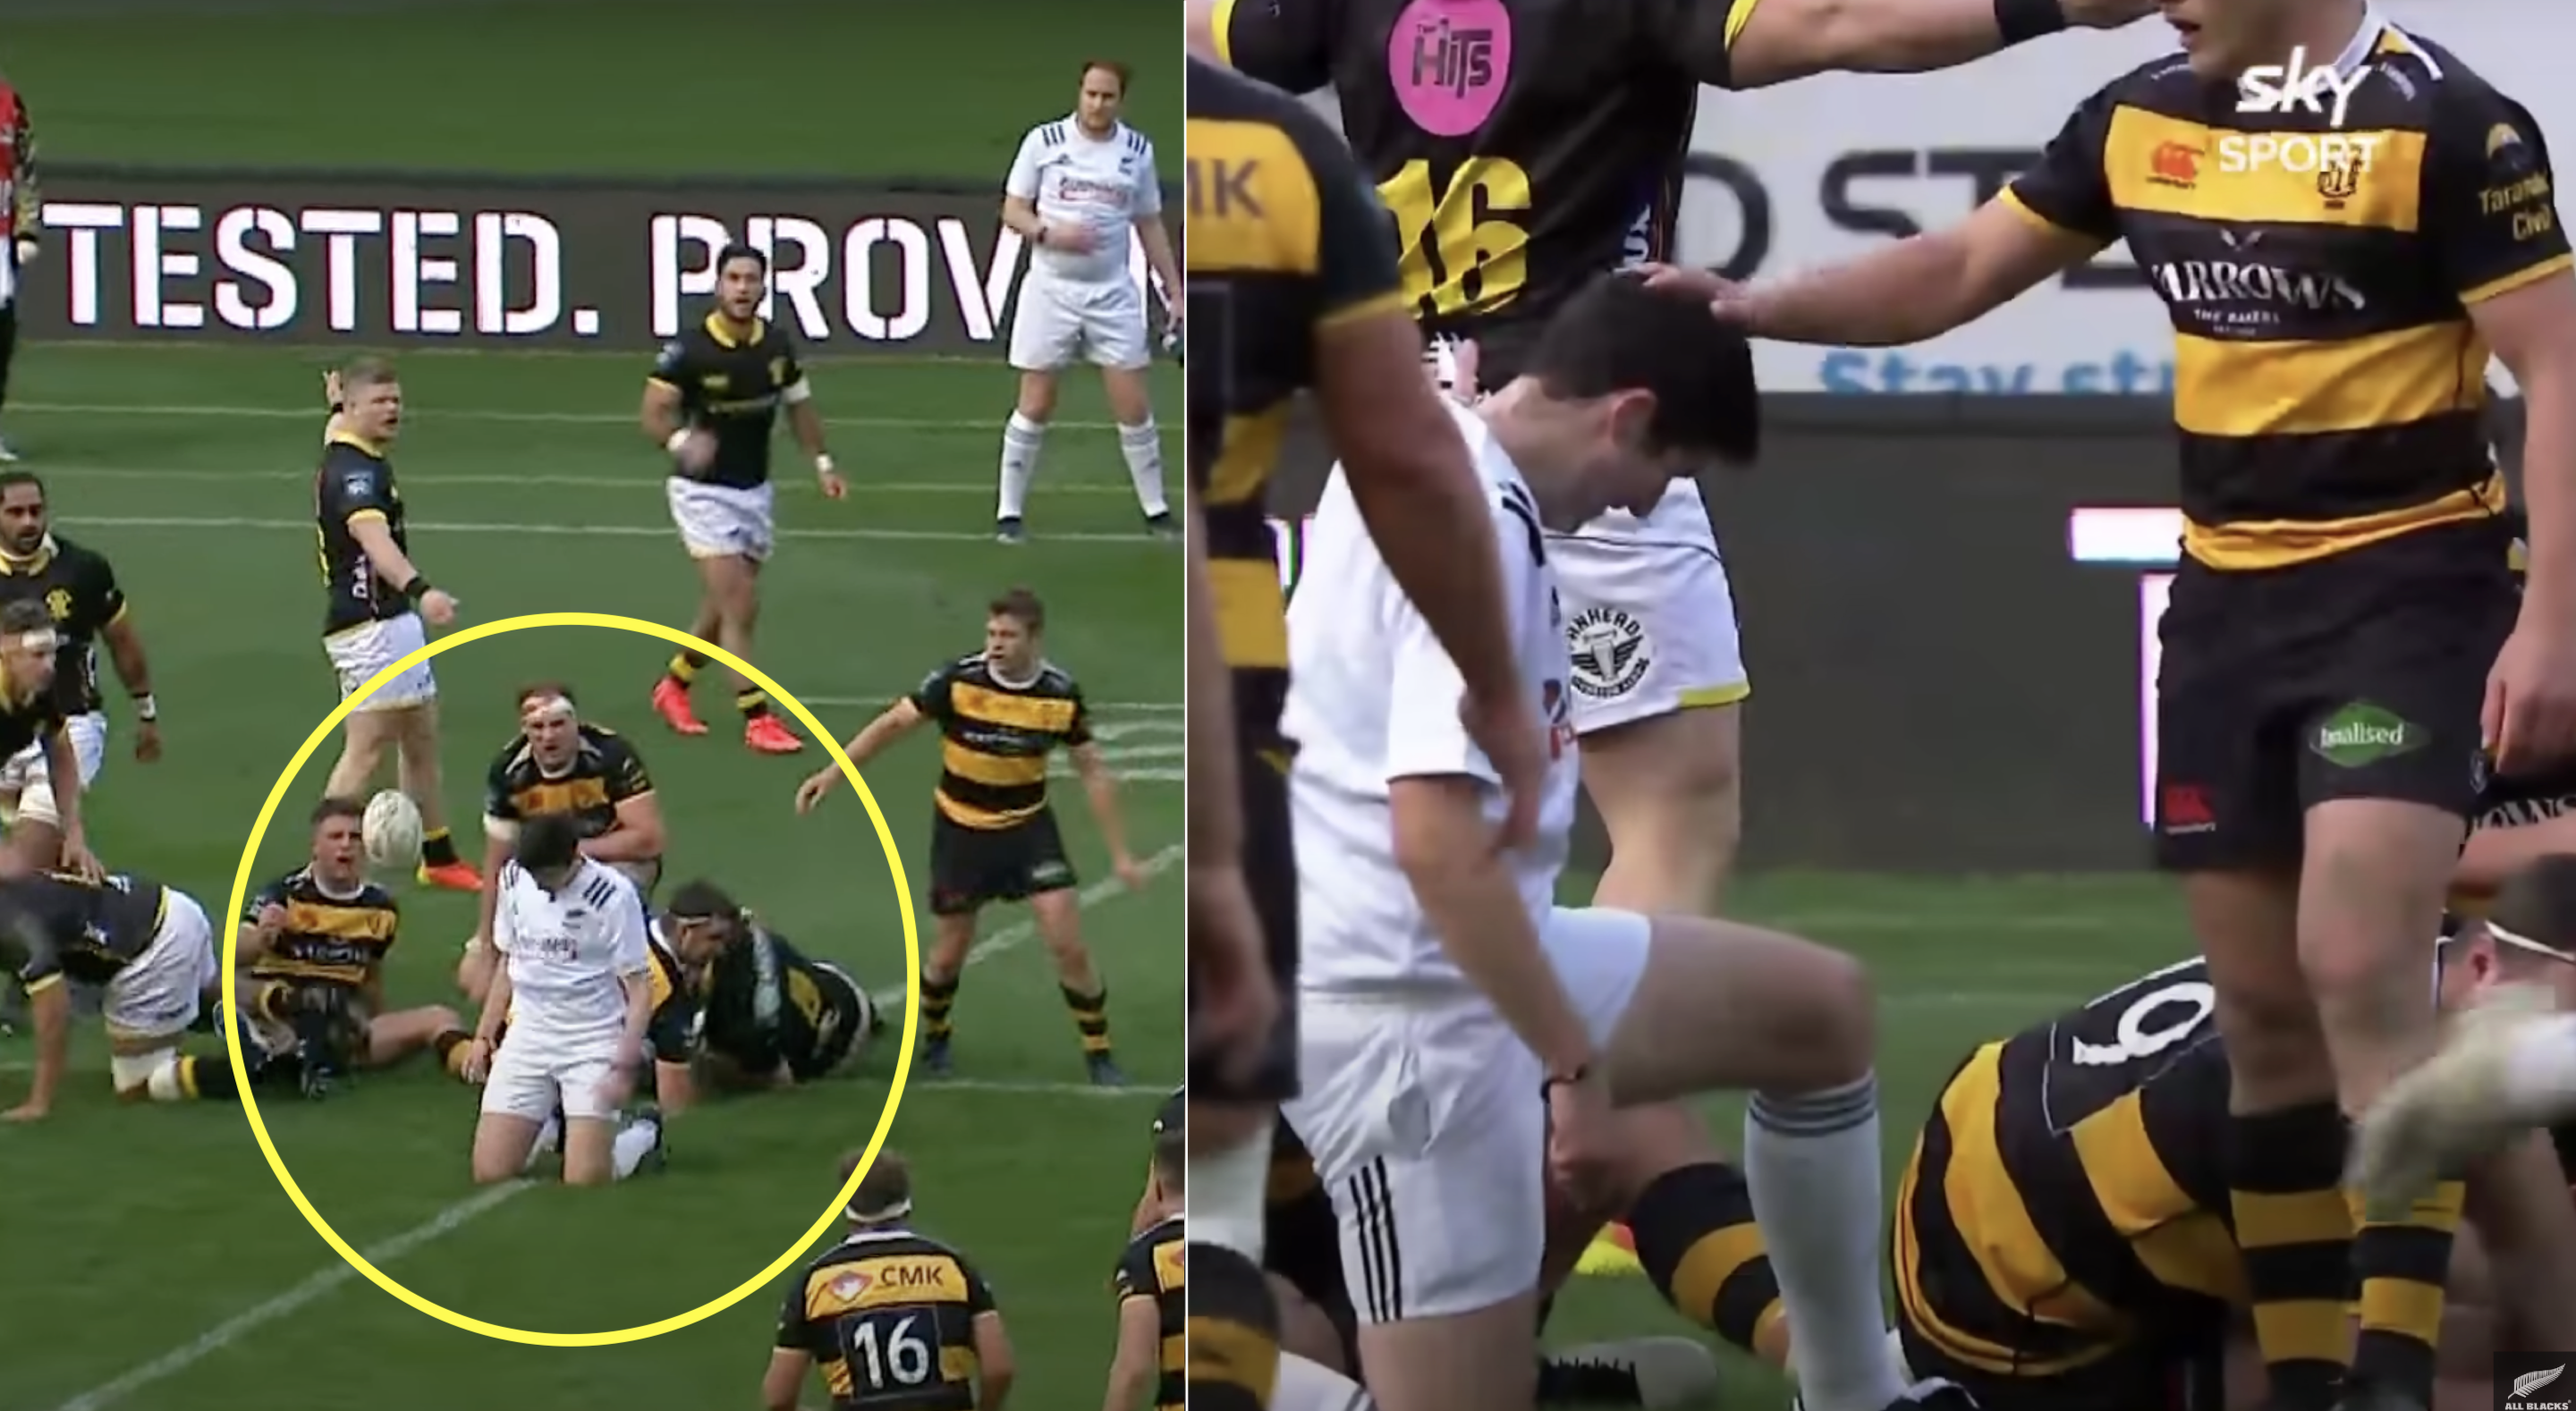 Referee gets completely decked by No9 after controversial call